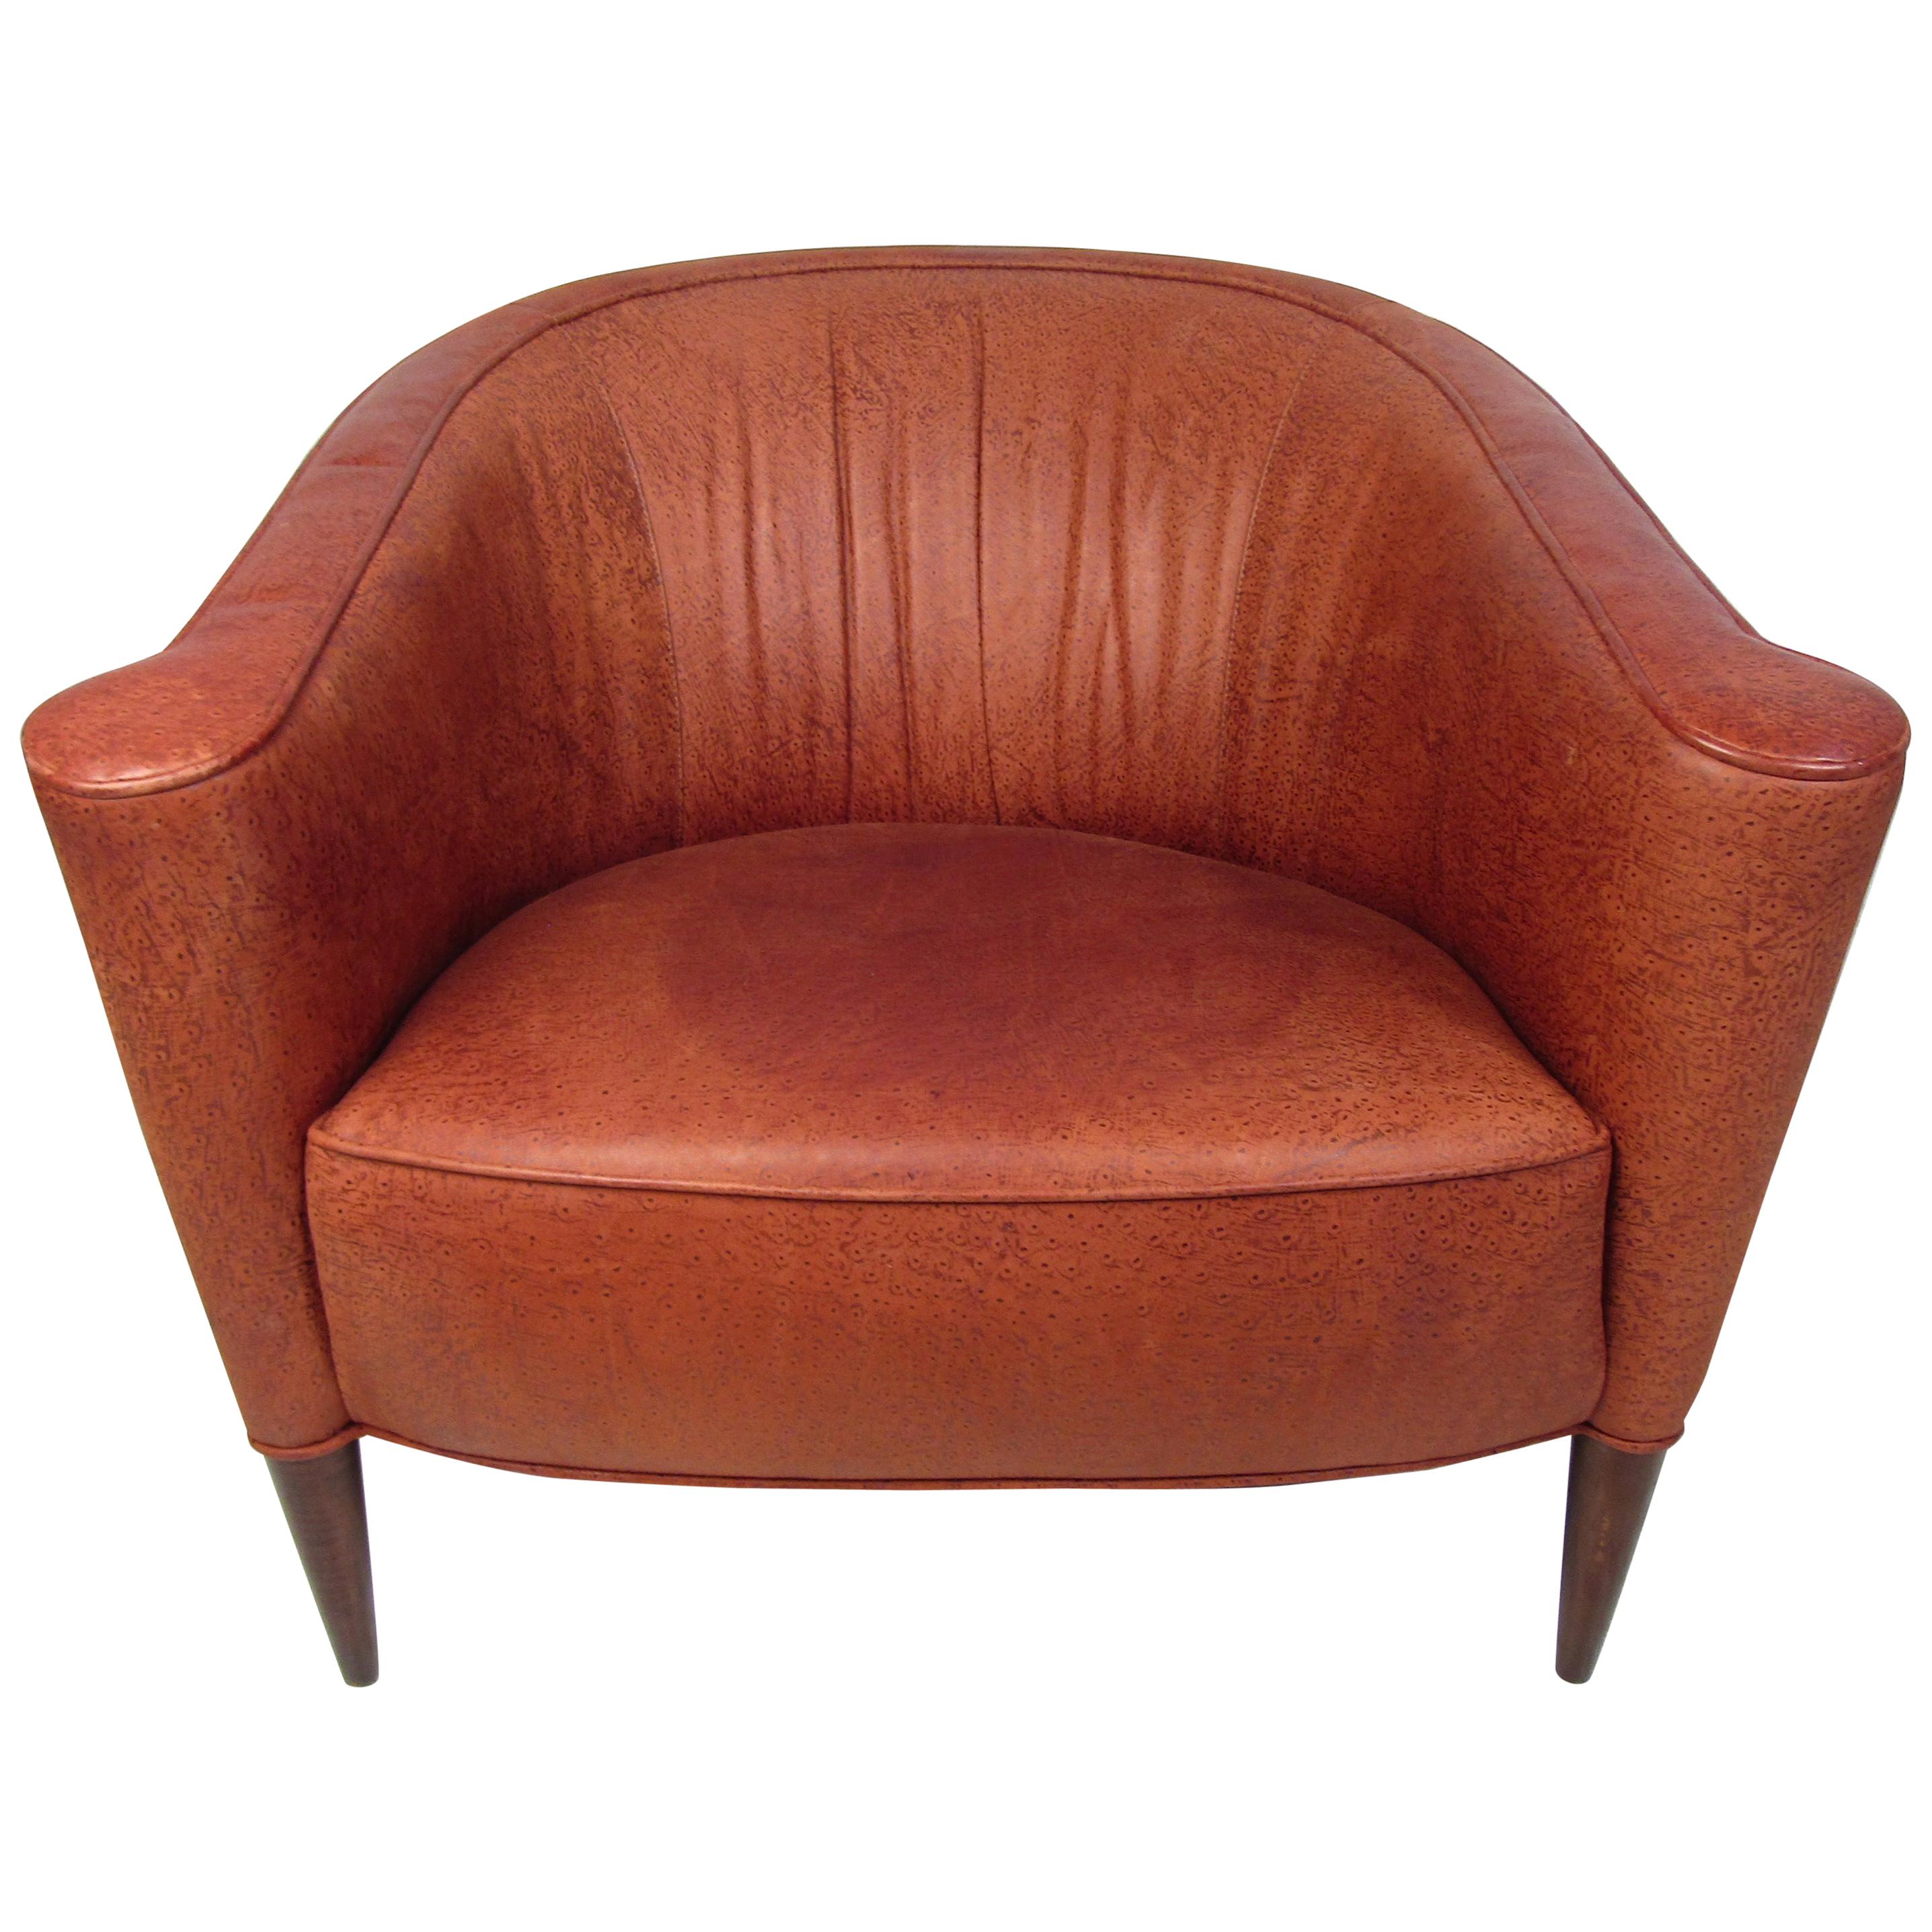 Vintage Hard Wood and Leather Lounge Chair